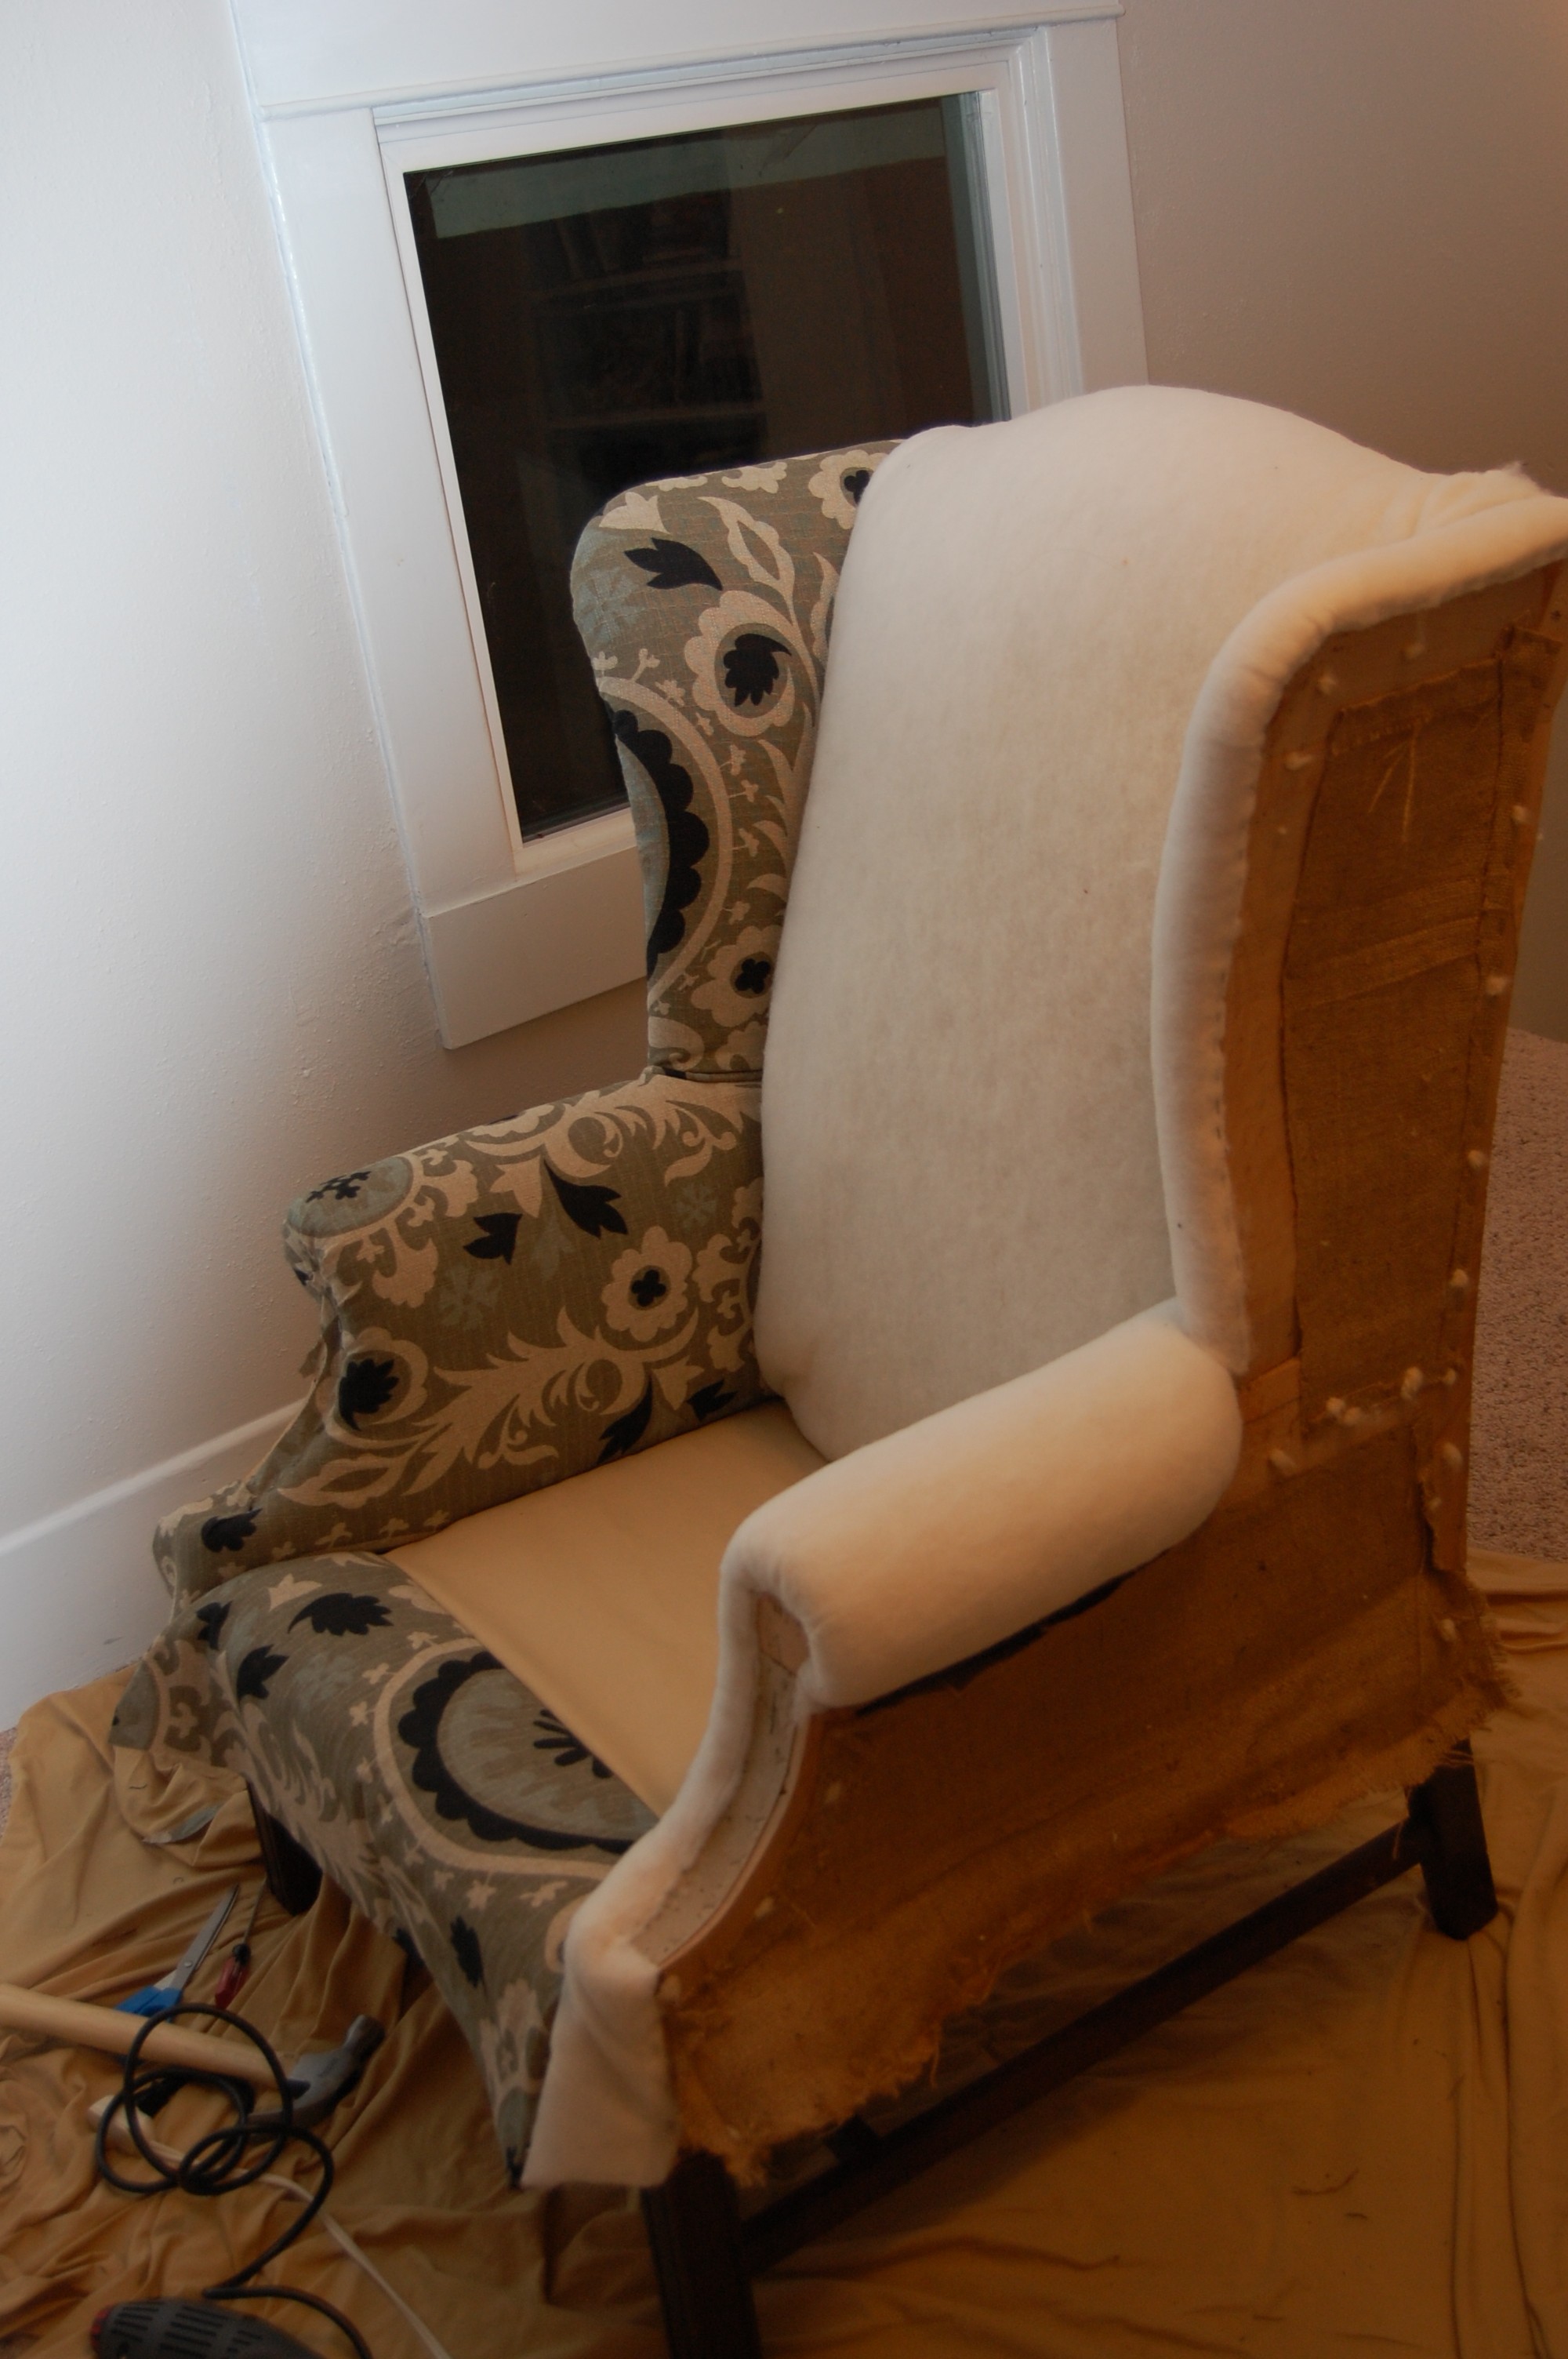 What instructional videos offer a step-by-step guide to reupholster a sofa?